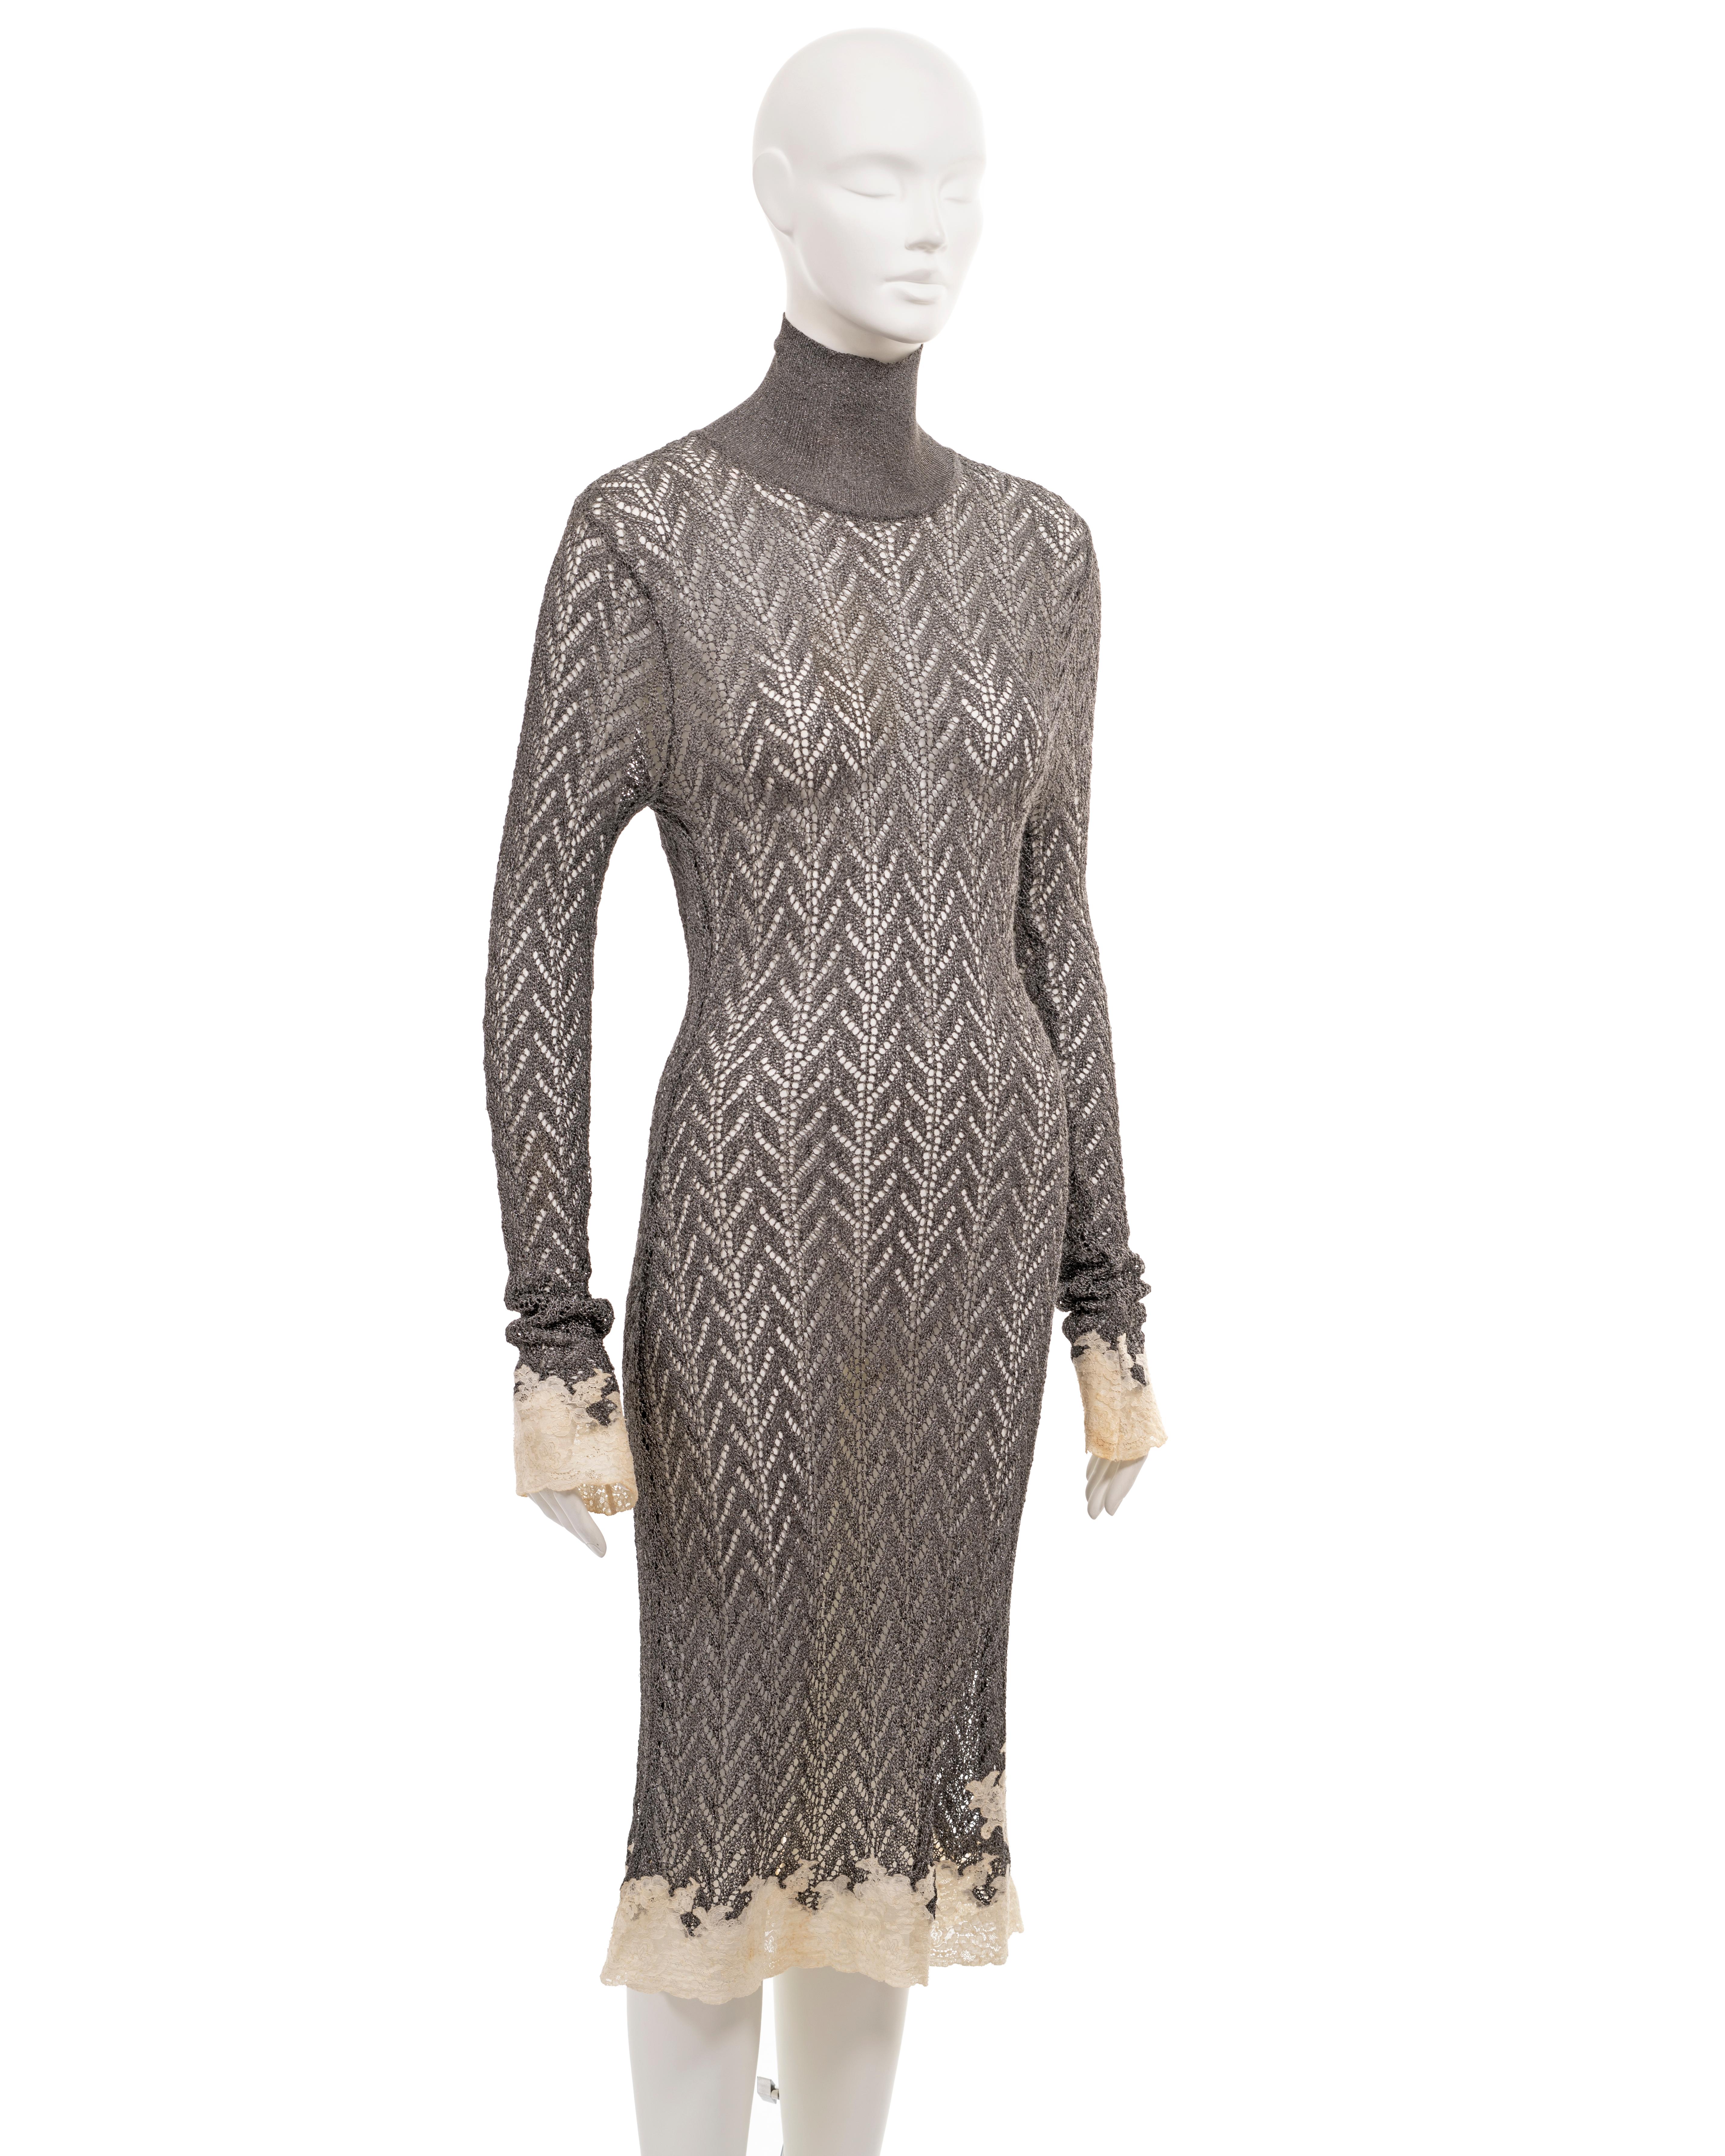 Christian Dior by John Galliano silver open-knit dress with lace trim, fw 1998 For Sale 6